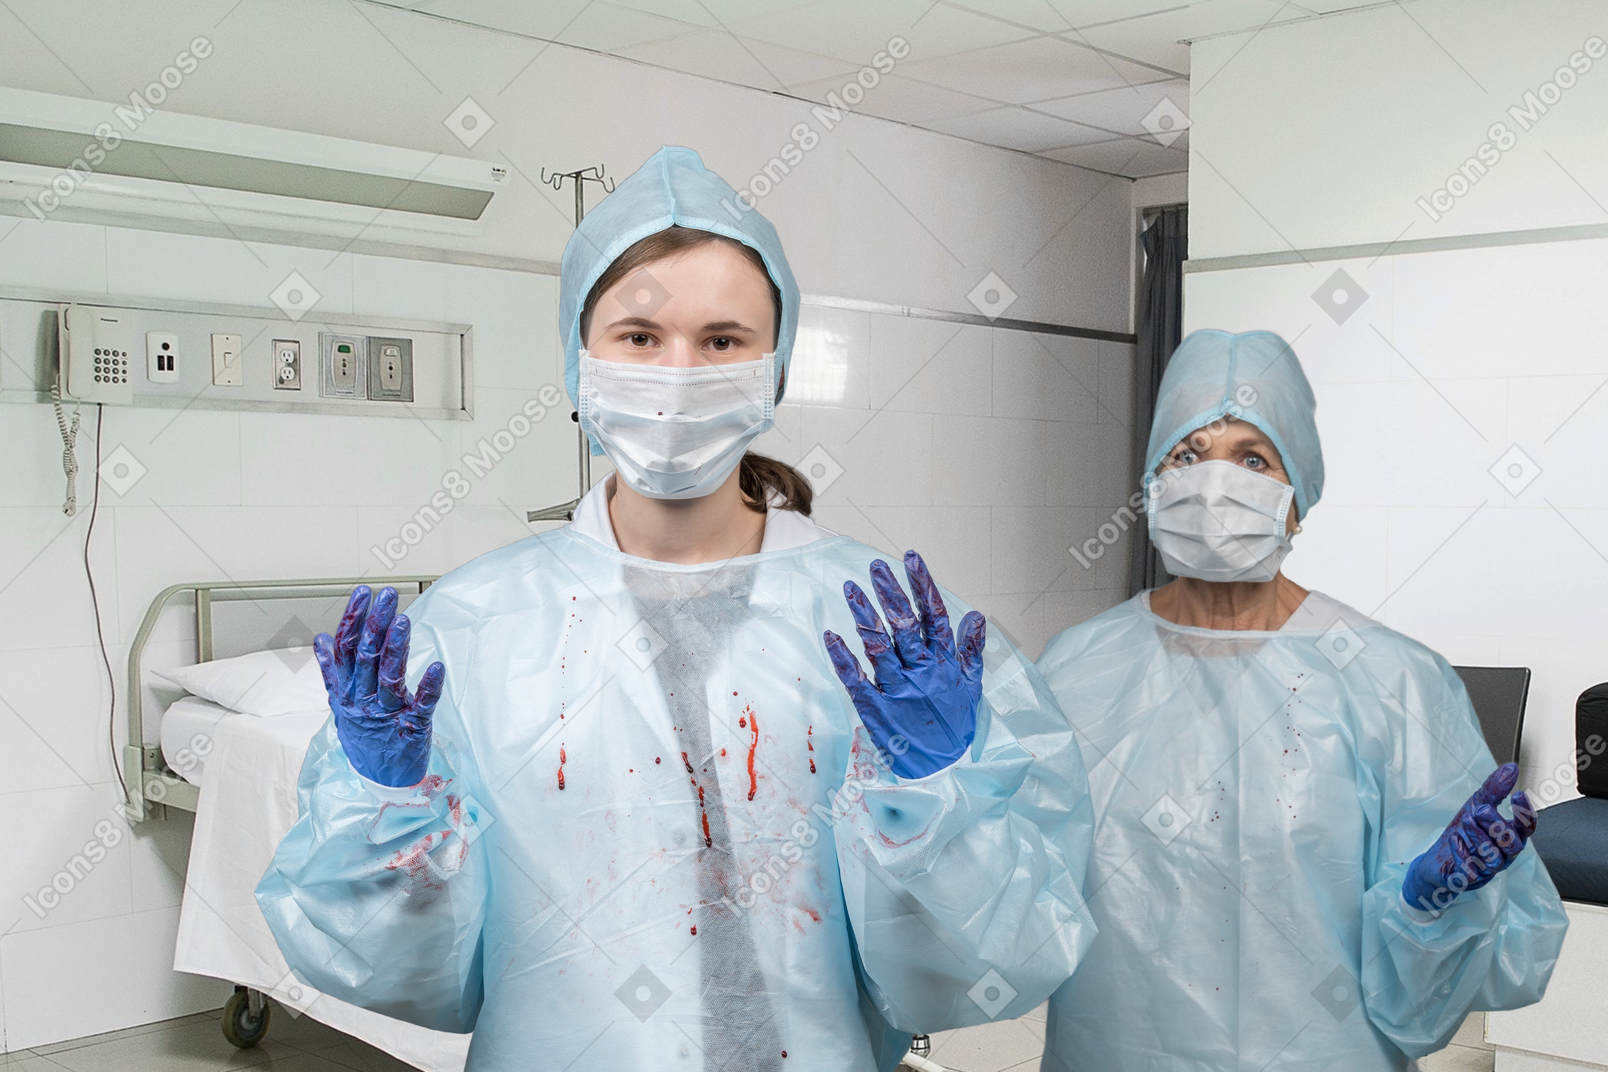 Surgeons in scrubs in an operating room